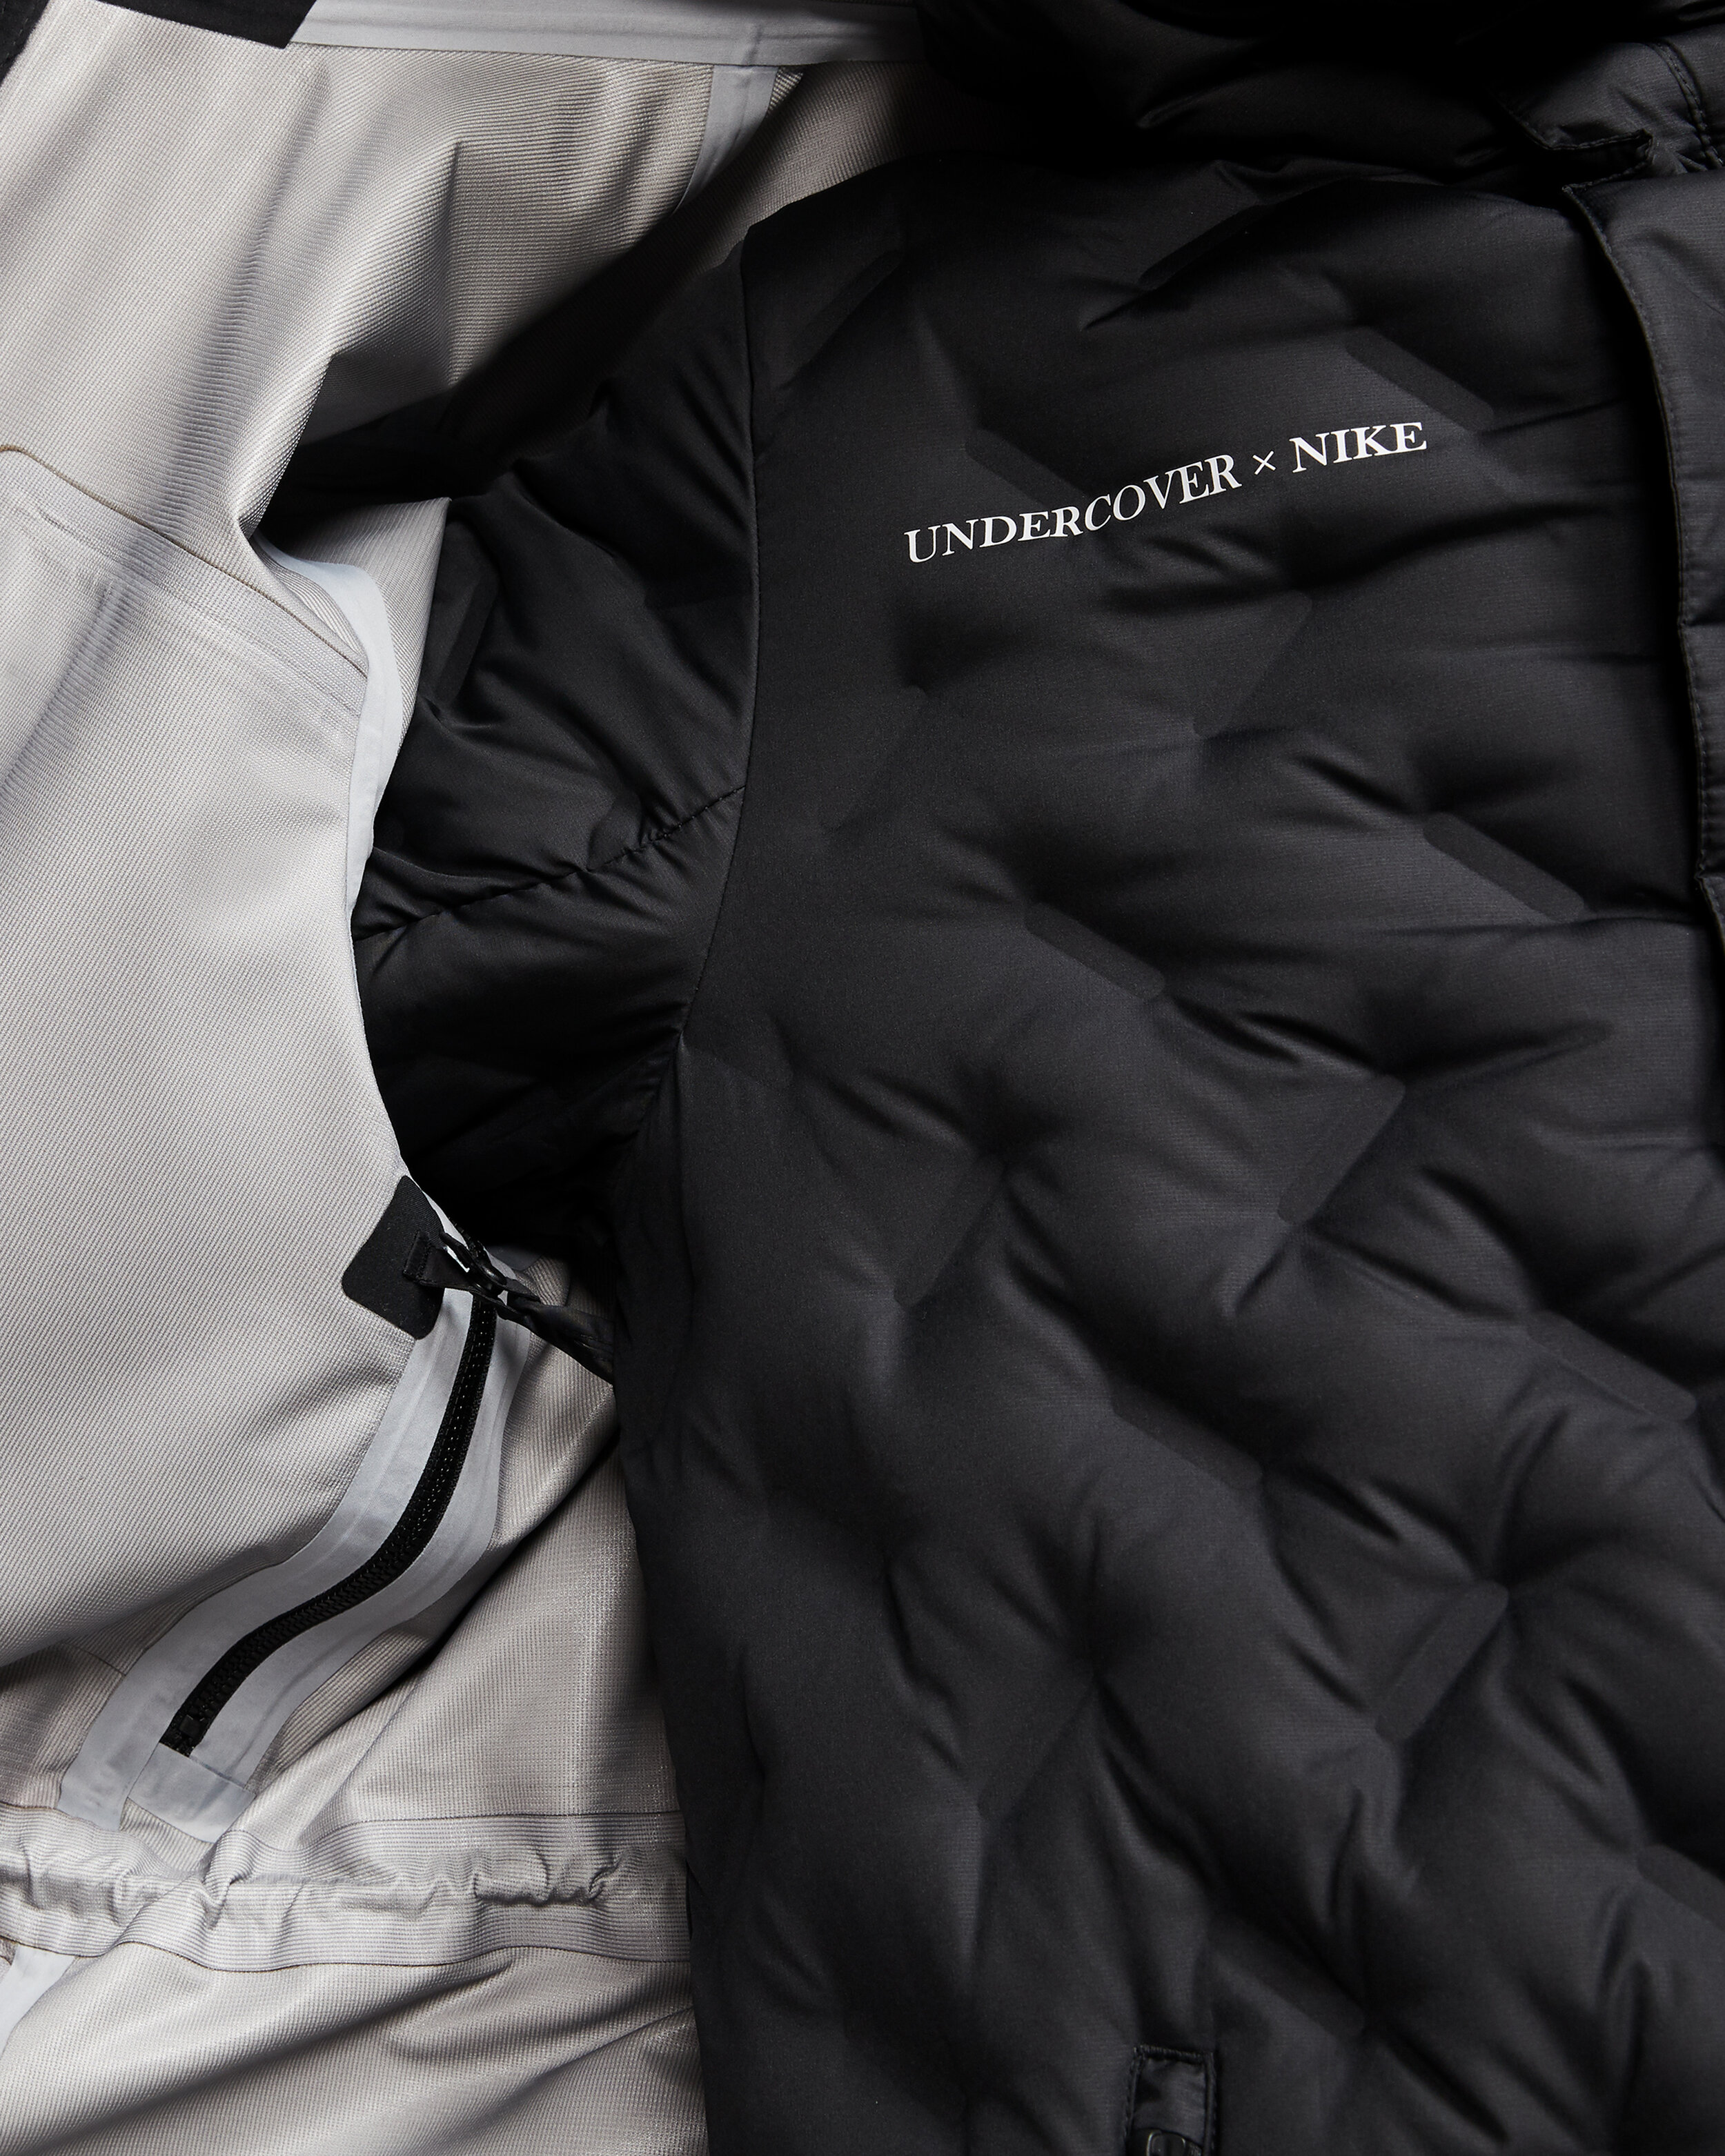 Undercover's Nike Winter Collection Debuts Next Week